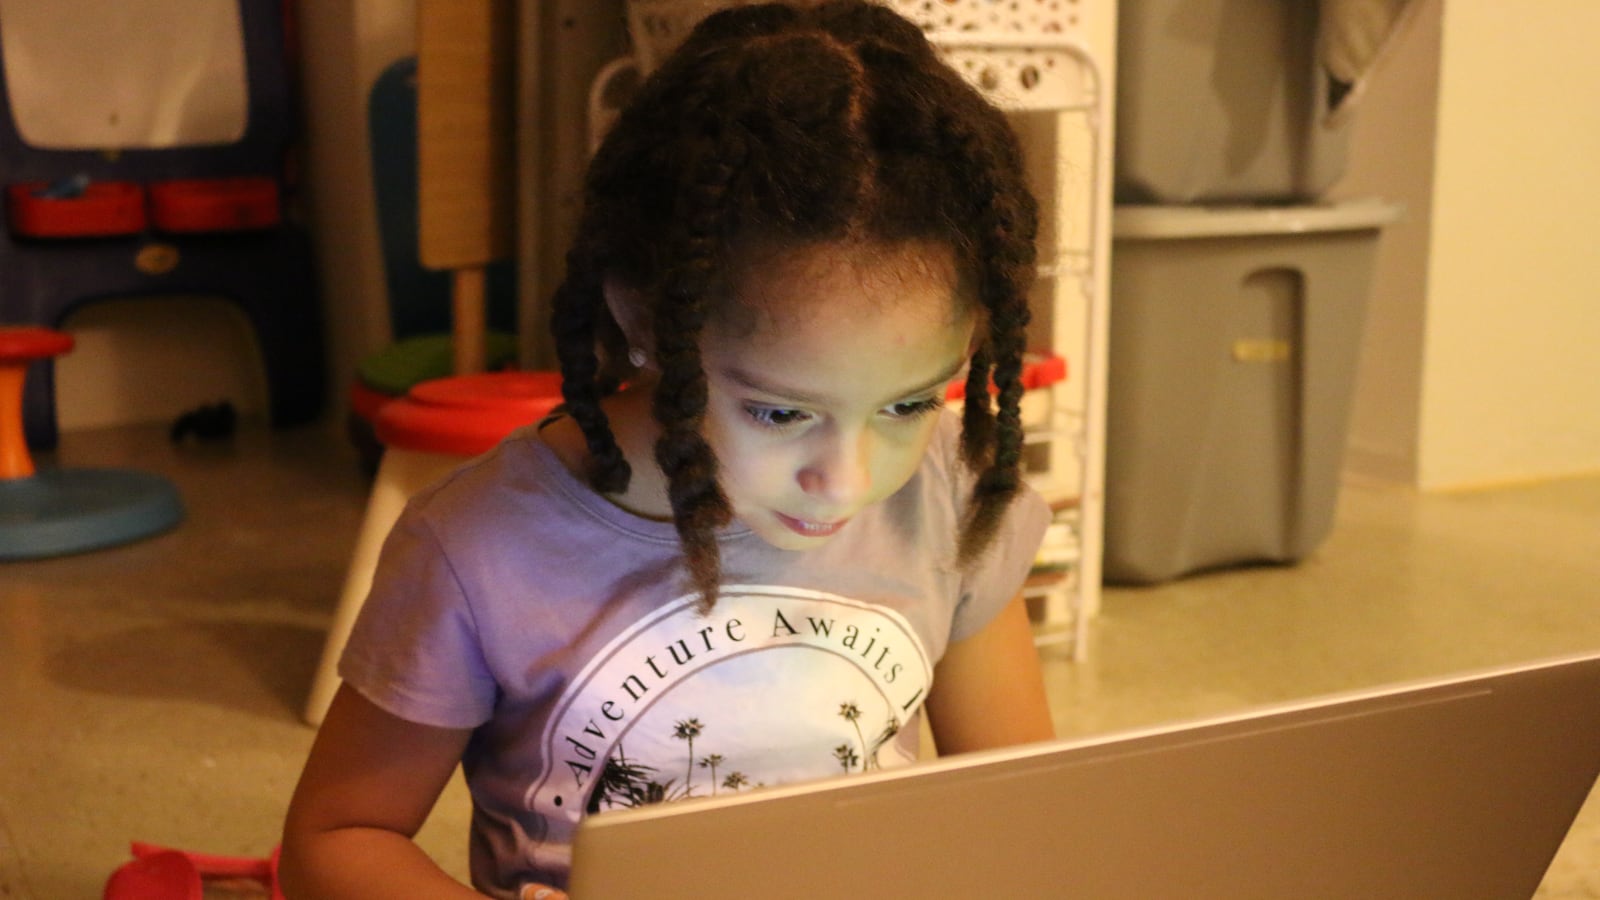 Jazmiah Vasquez, who has been out of school since 2017, plays a computer game at home.